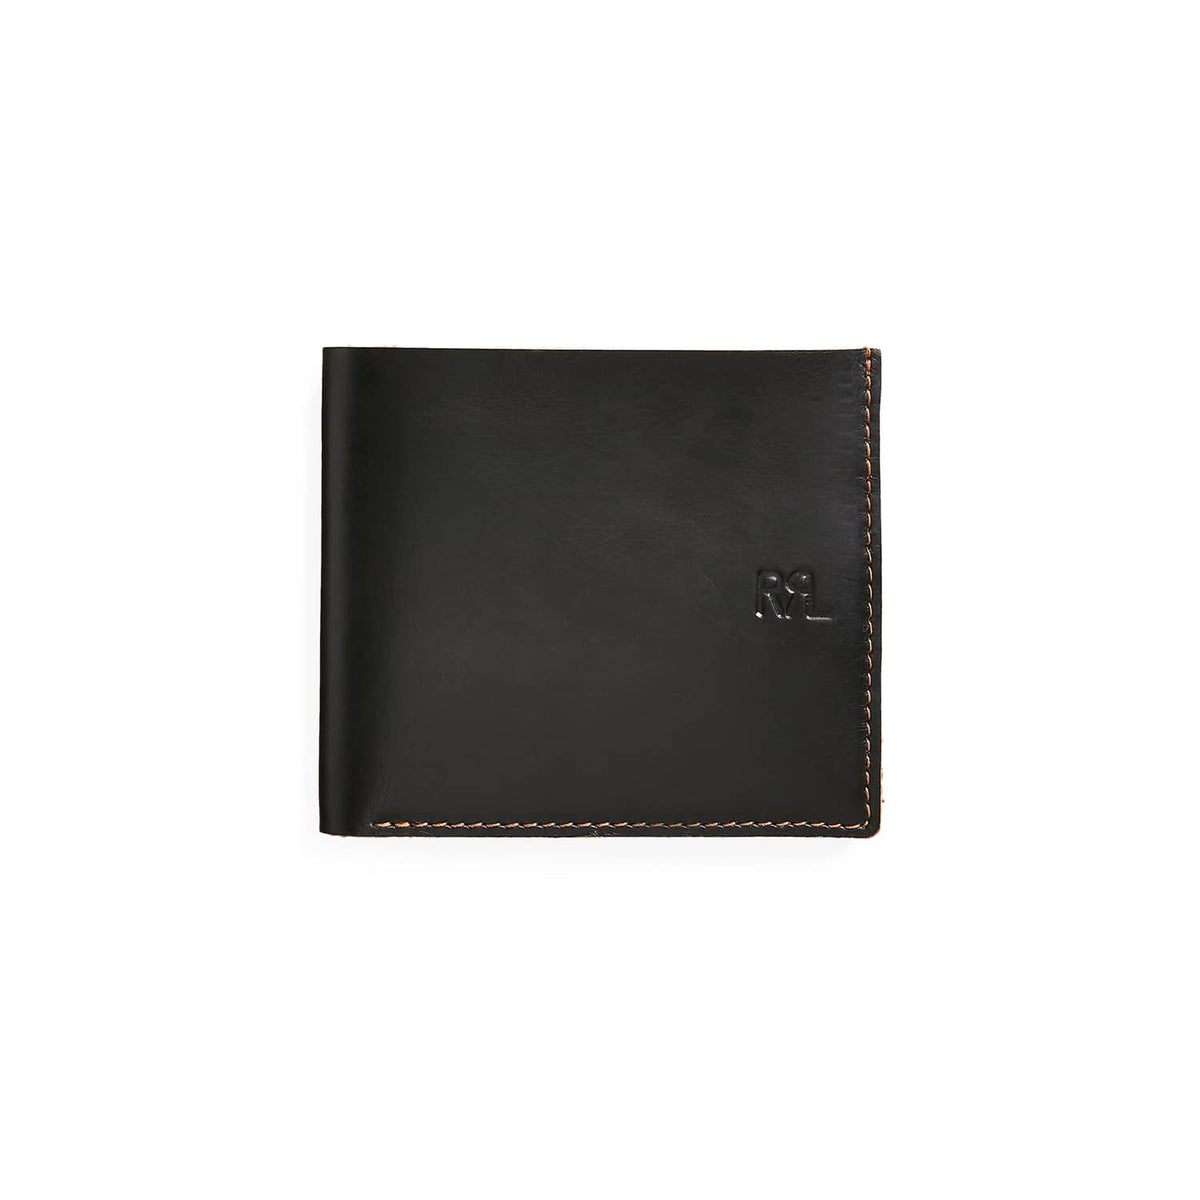 Real Mens Wallets Make Great Exotic Gifts - Salty and Stylish